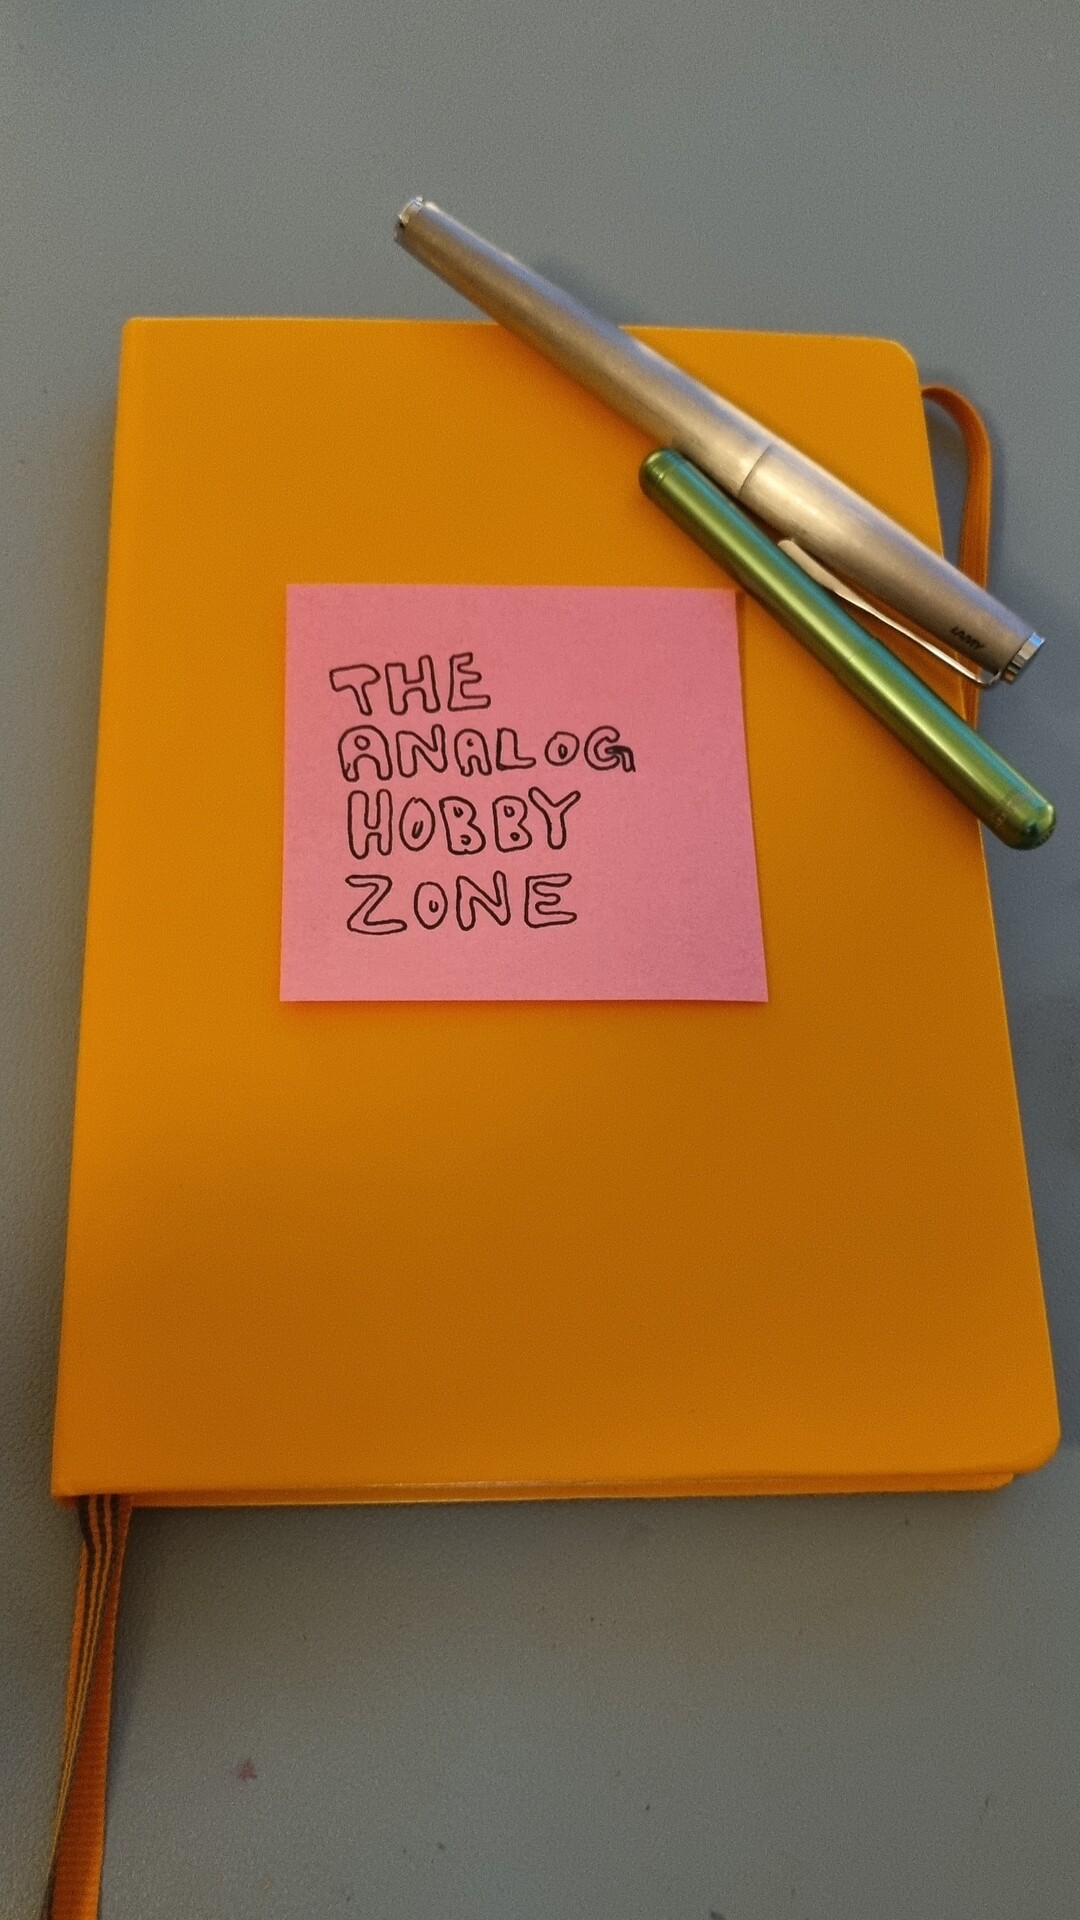 A pink postit style note on an orange book. Black block letters on the note say "THE ANALOGNHOBBY ZONE". There are two pens there too.